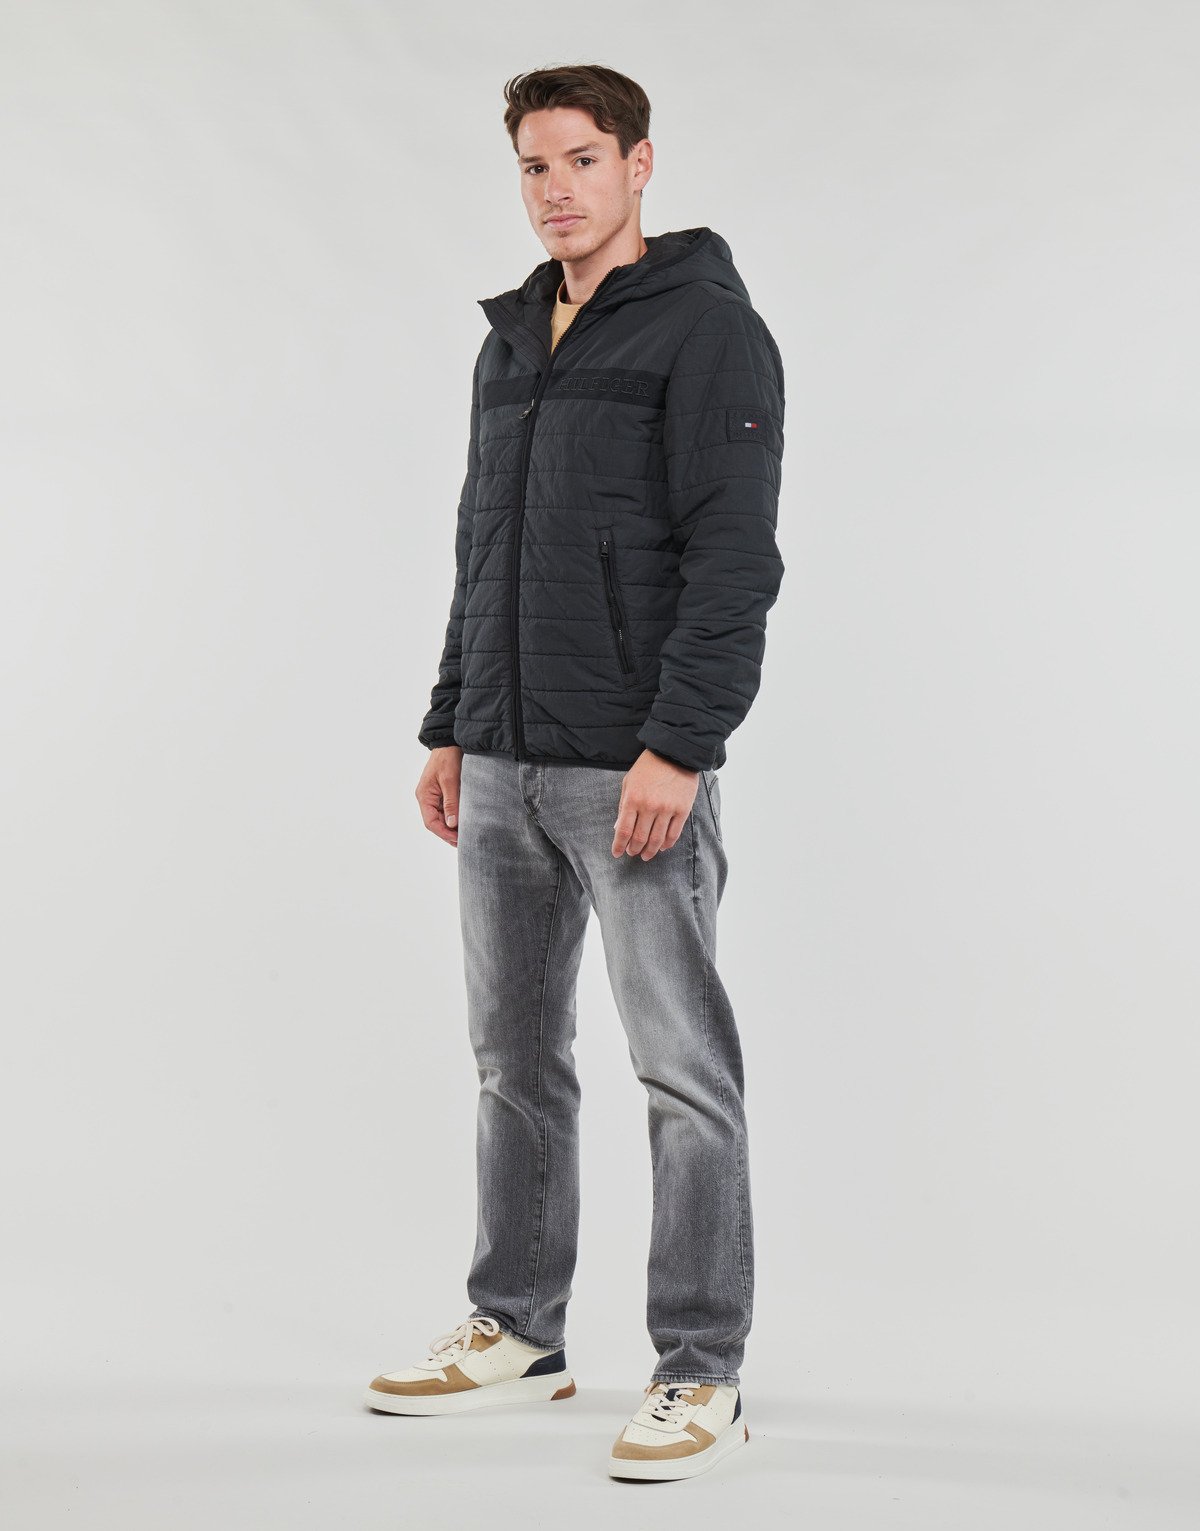 GMD PADDED HOODED JACKET